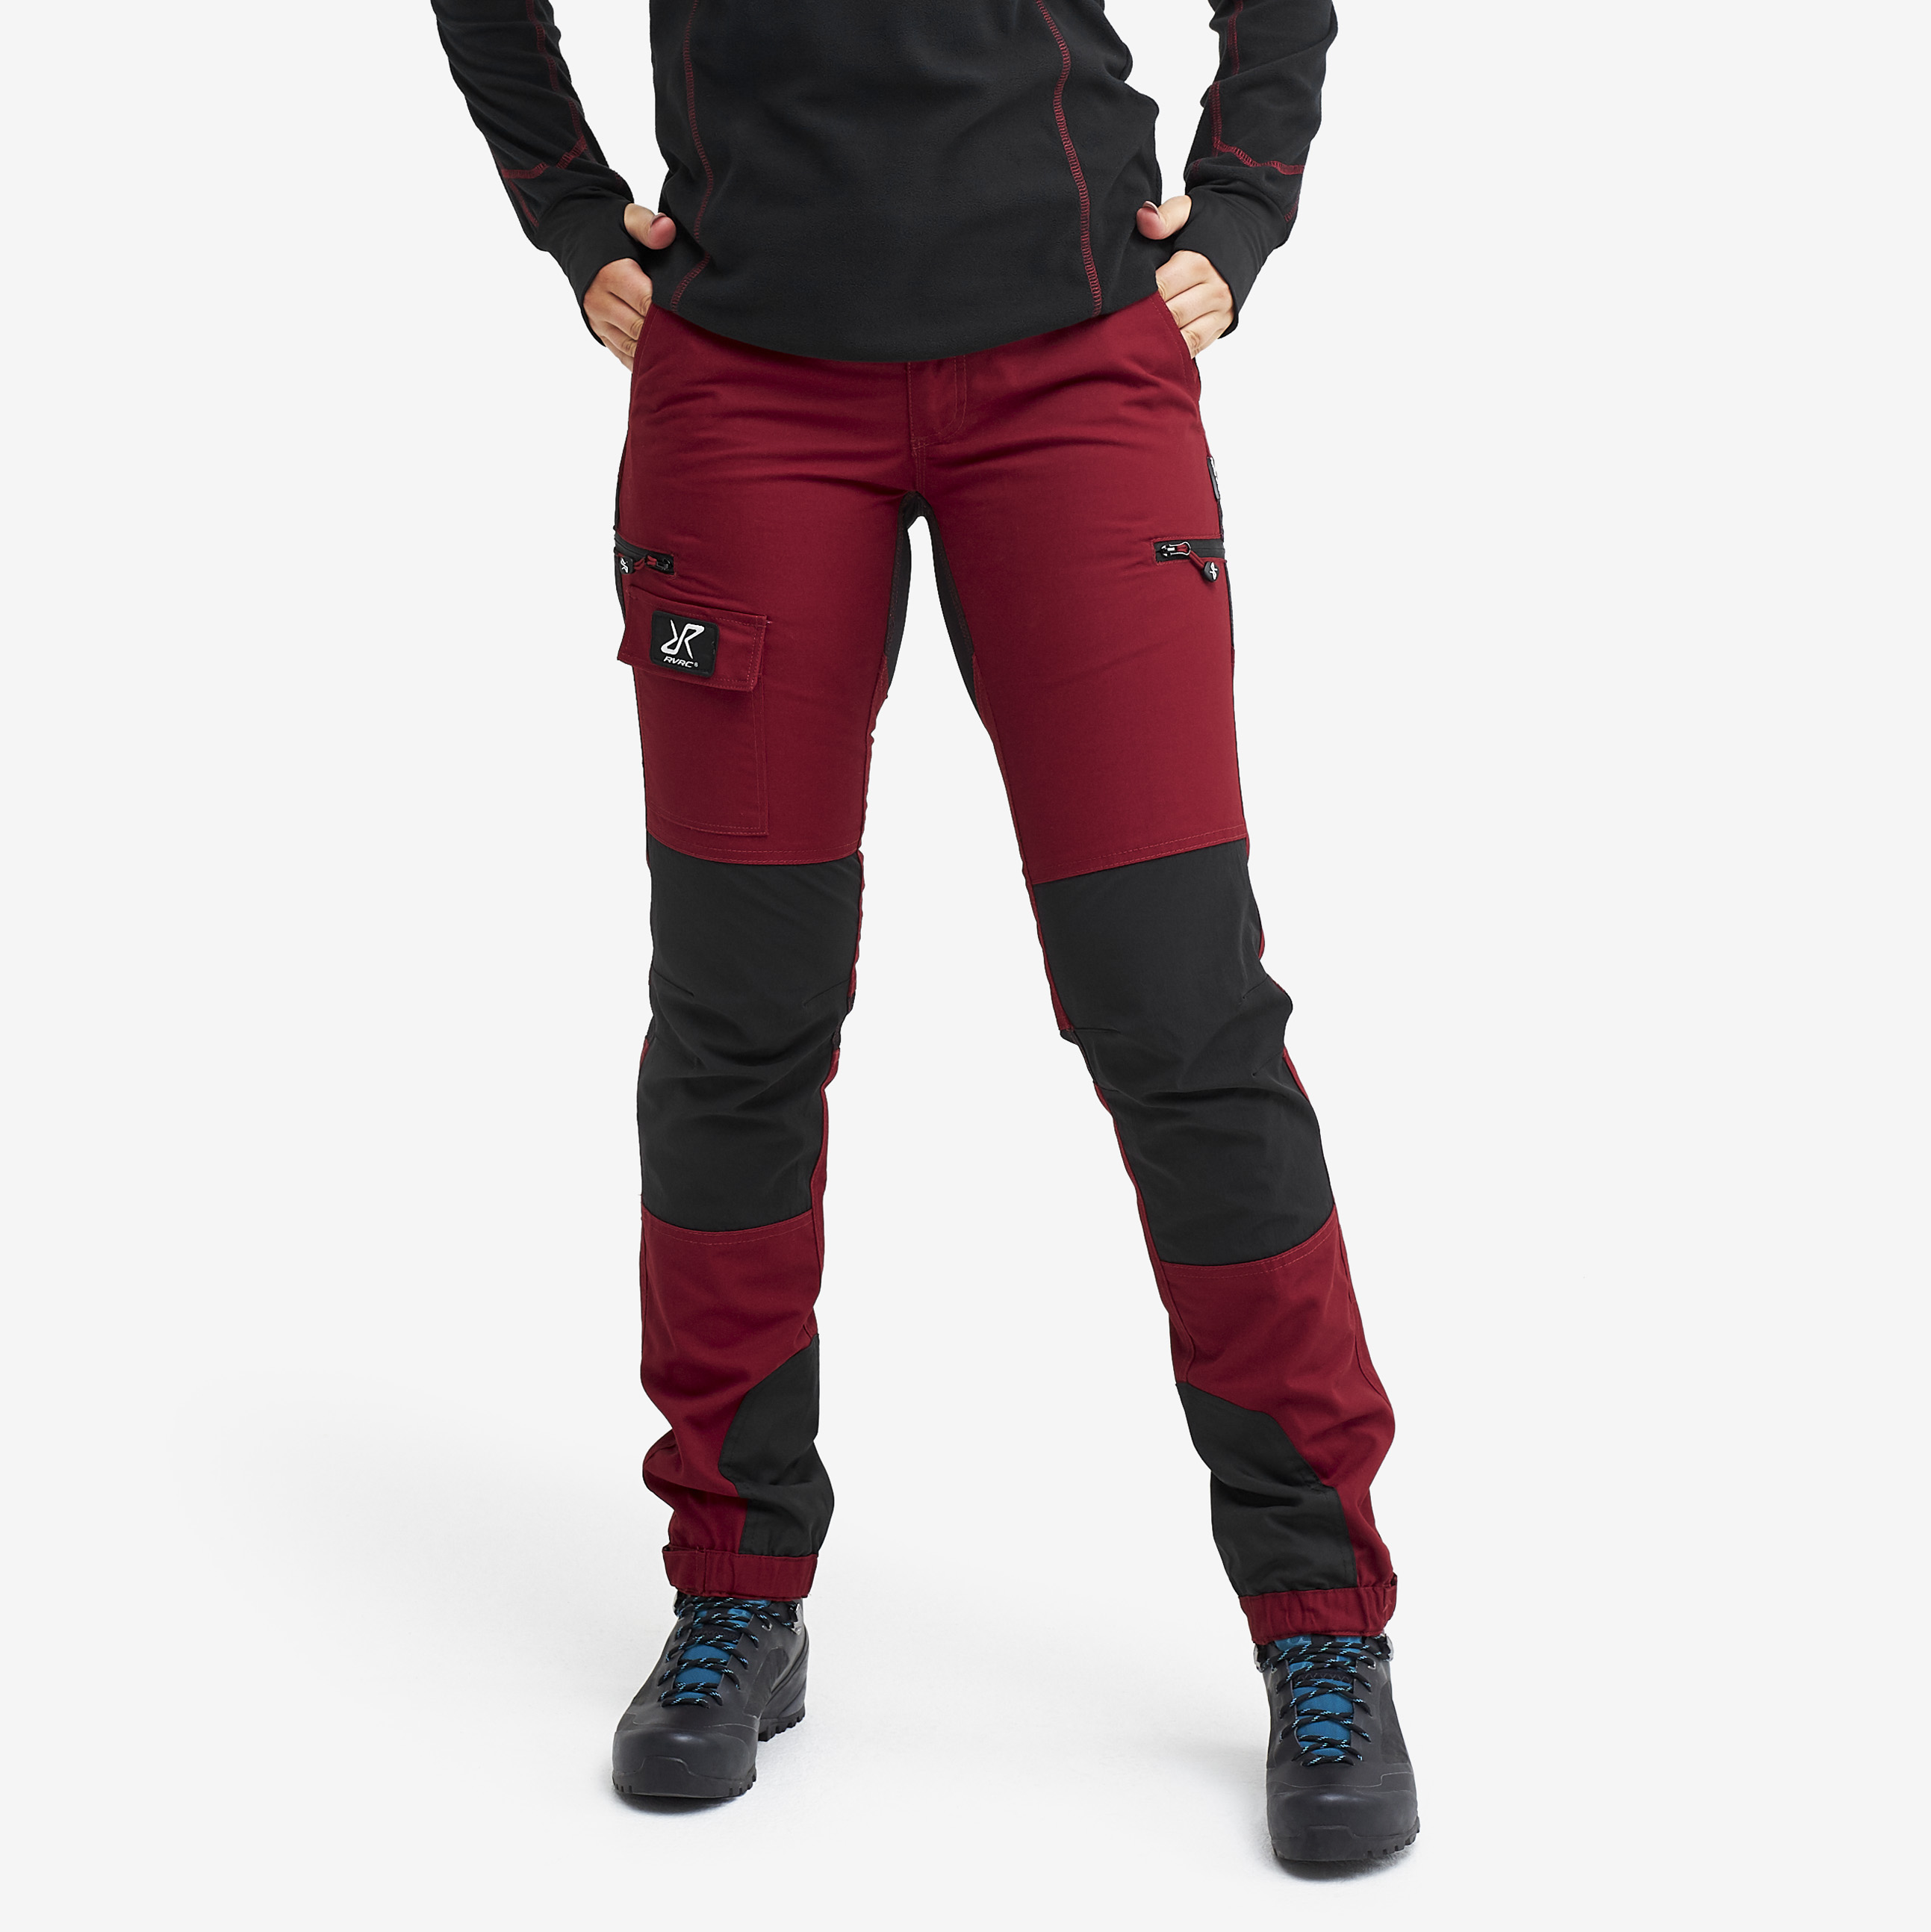 Nordwand Pants Wine Red Naiset